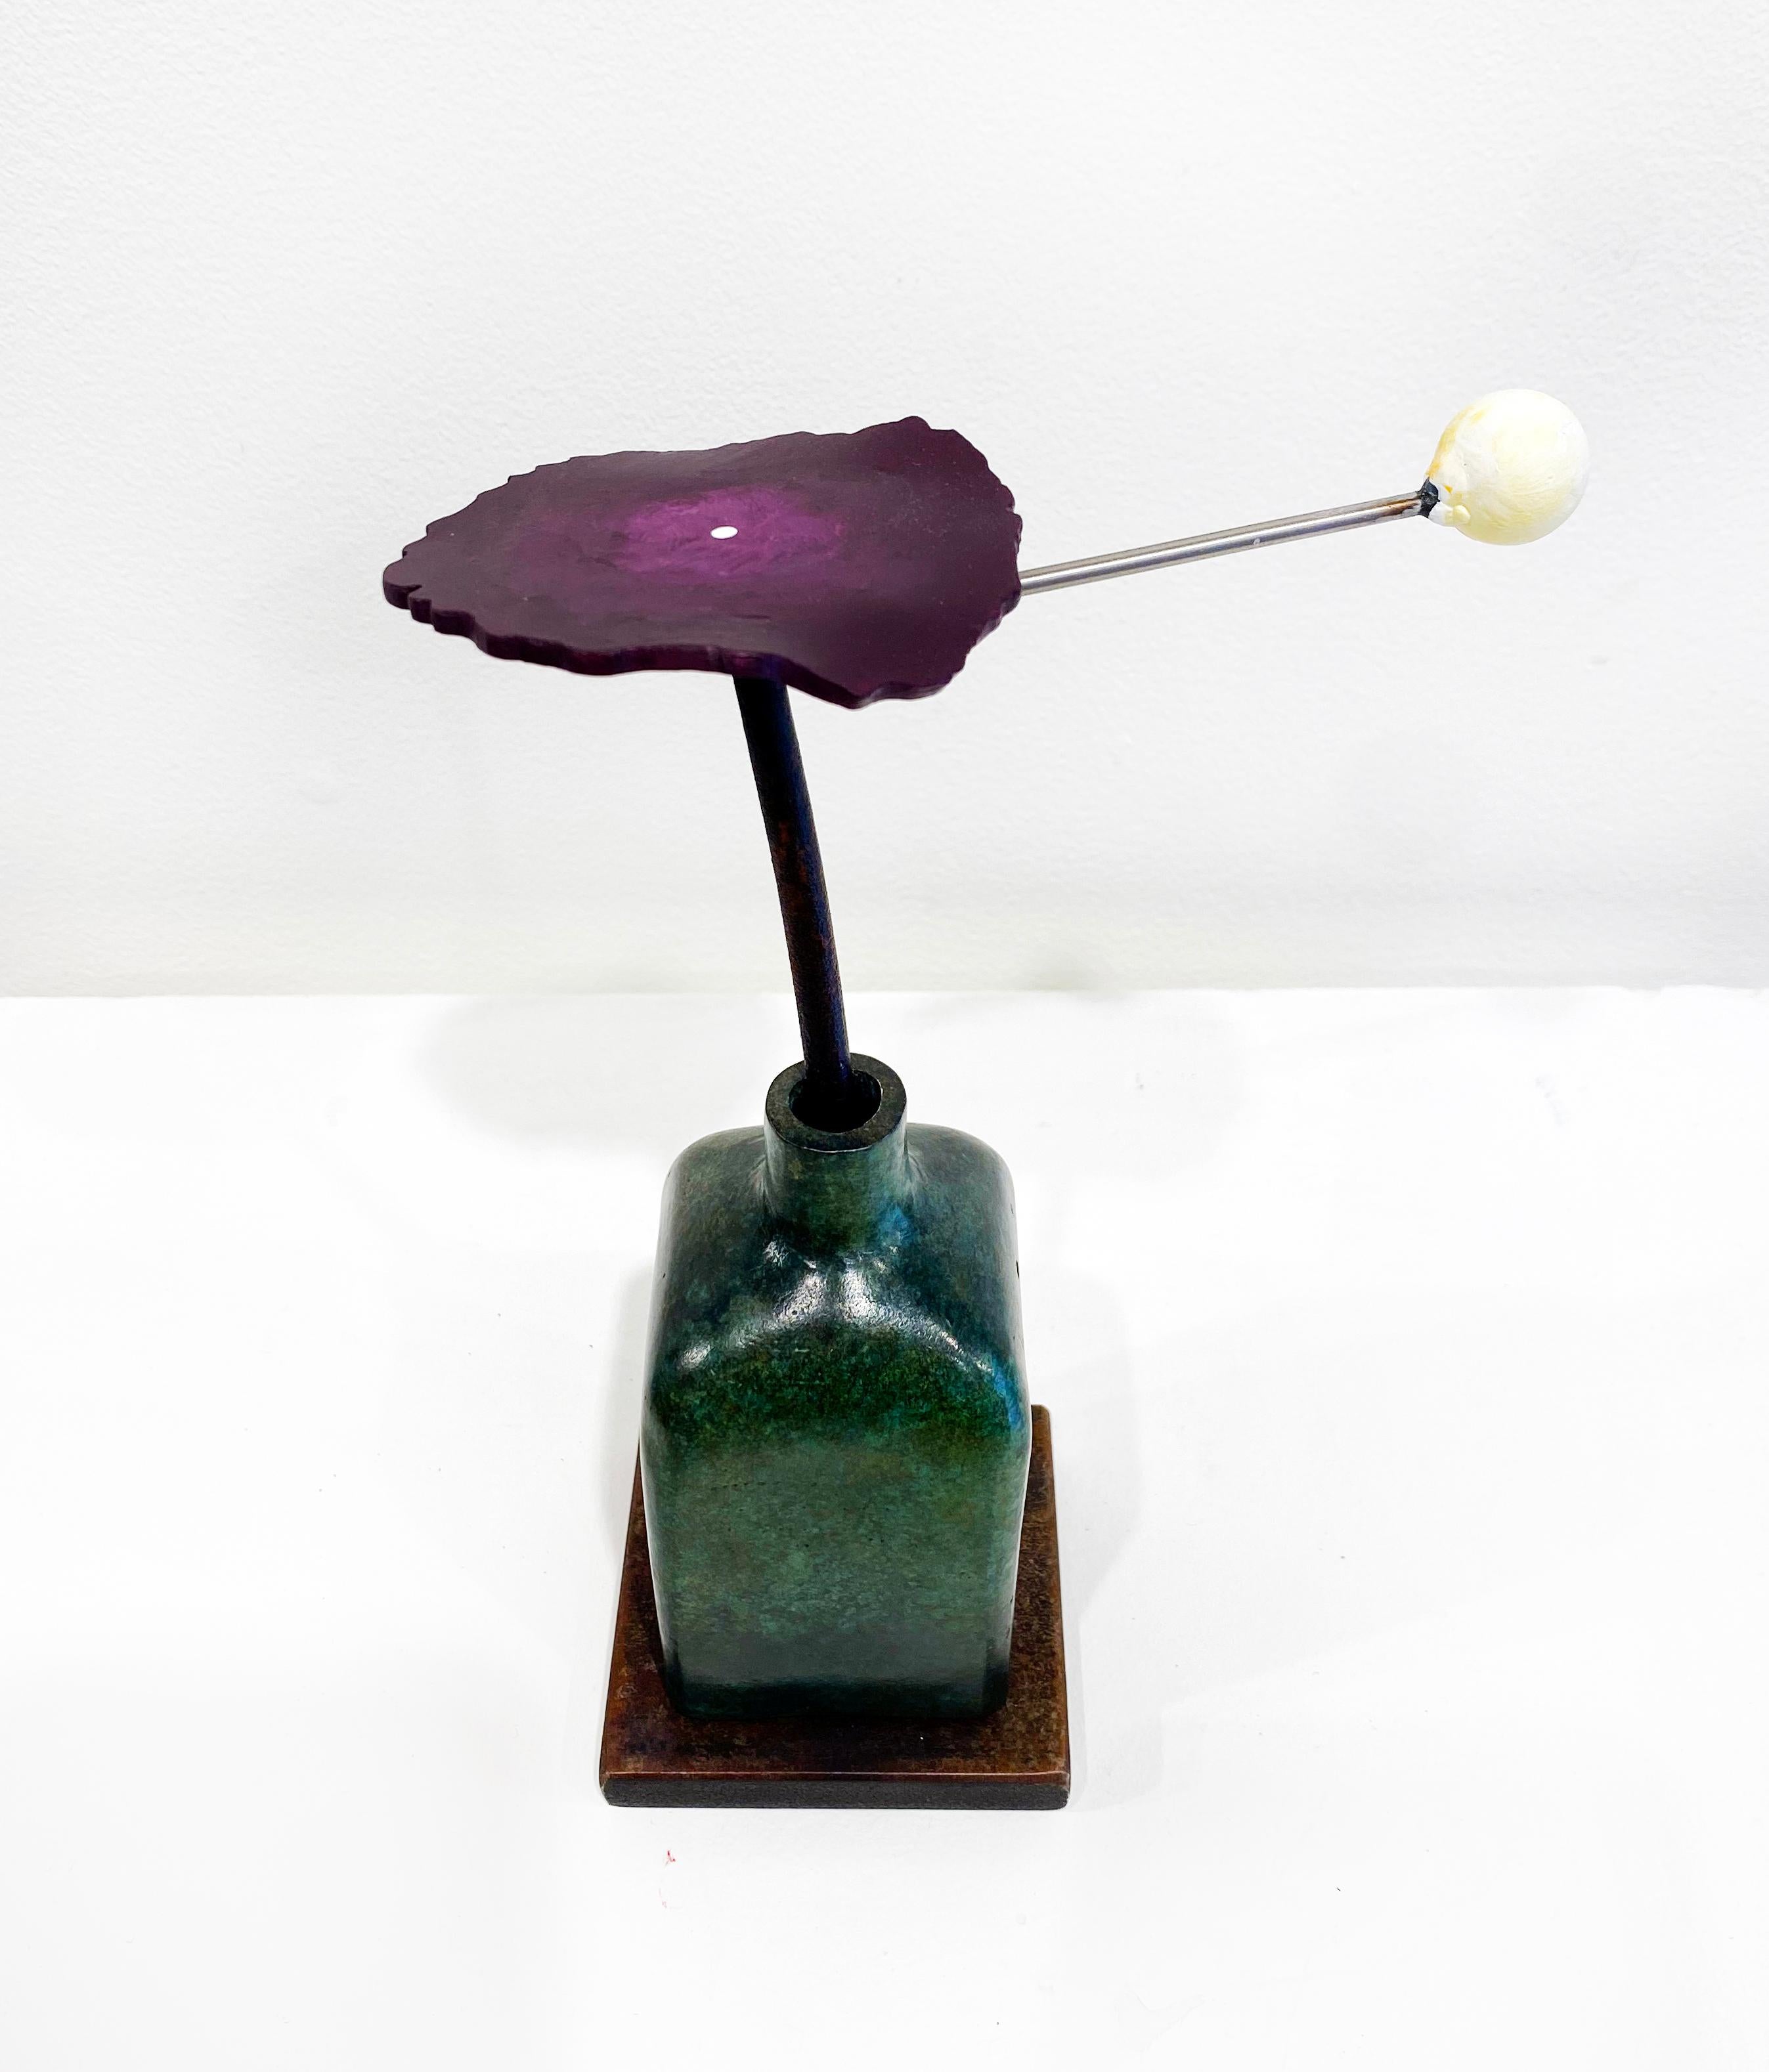 Bronze and Steel Sculpture by David Kimball Anderson 'Planet Purple Zinnia'